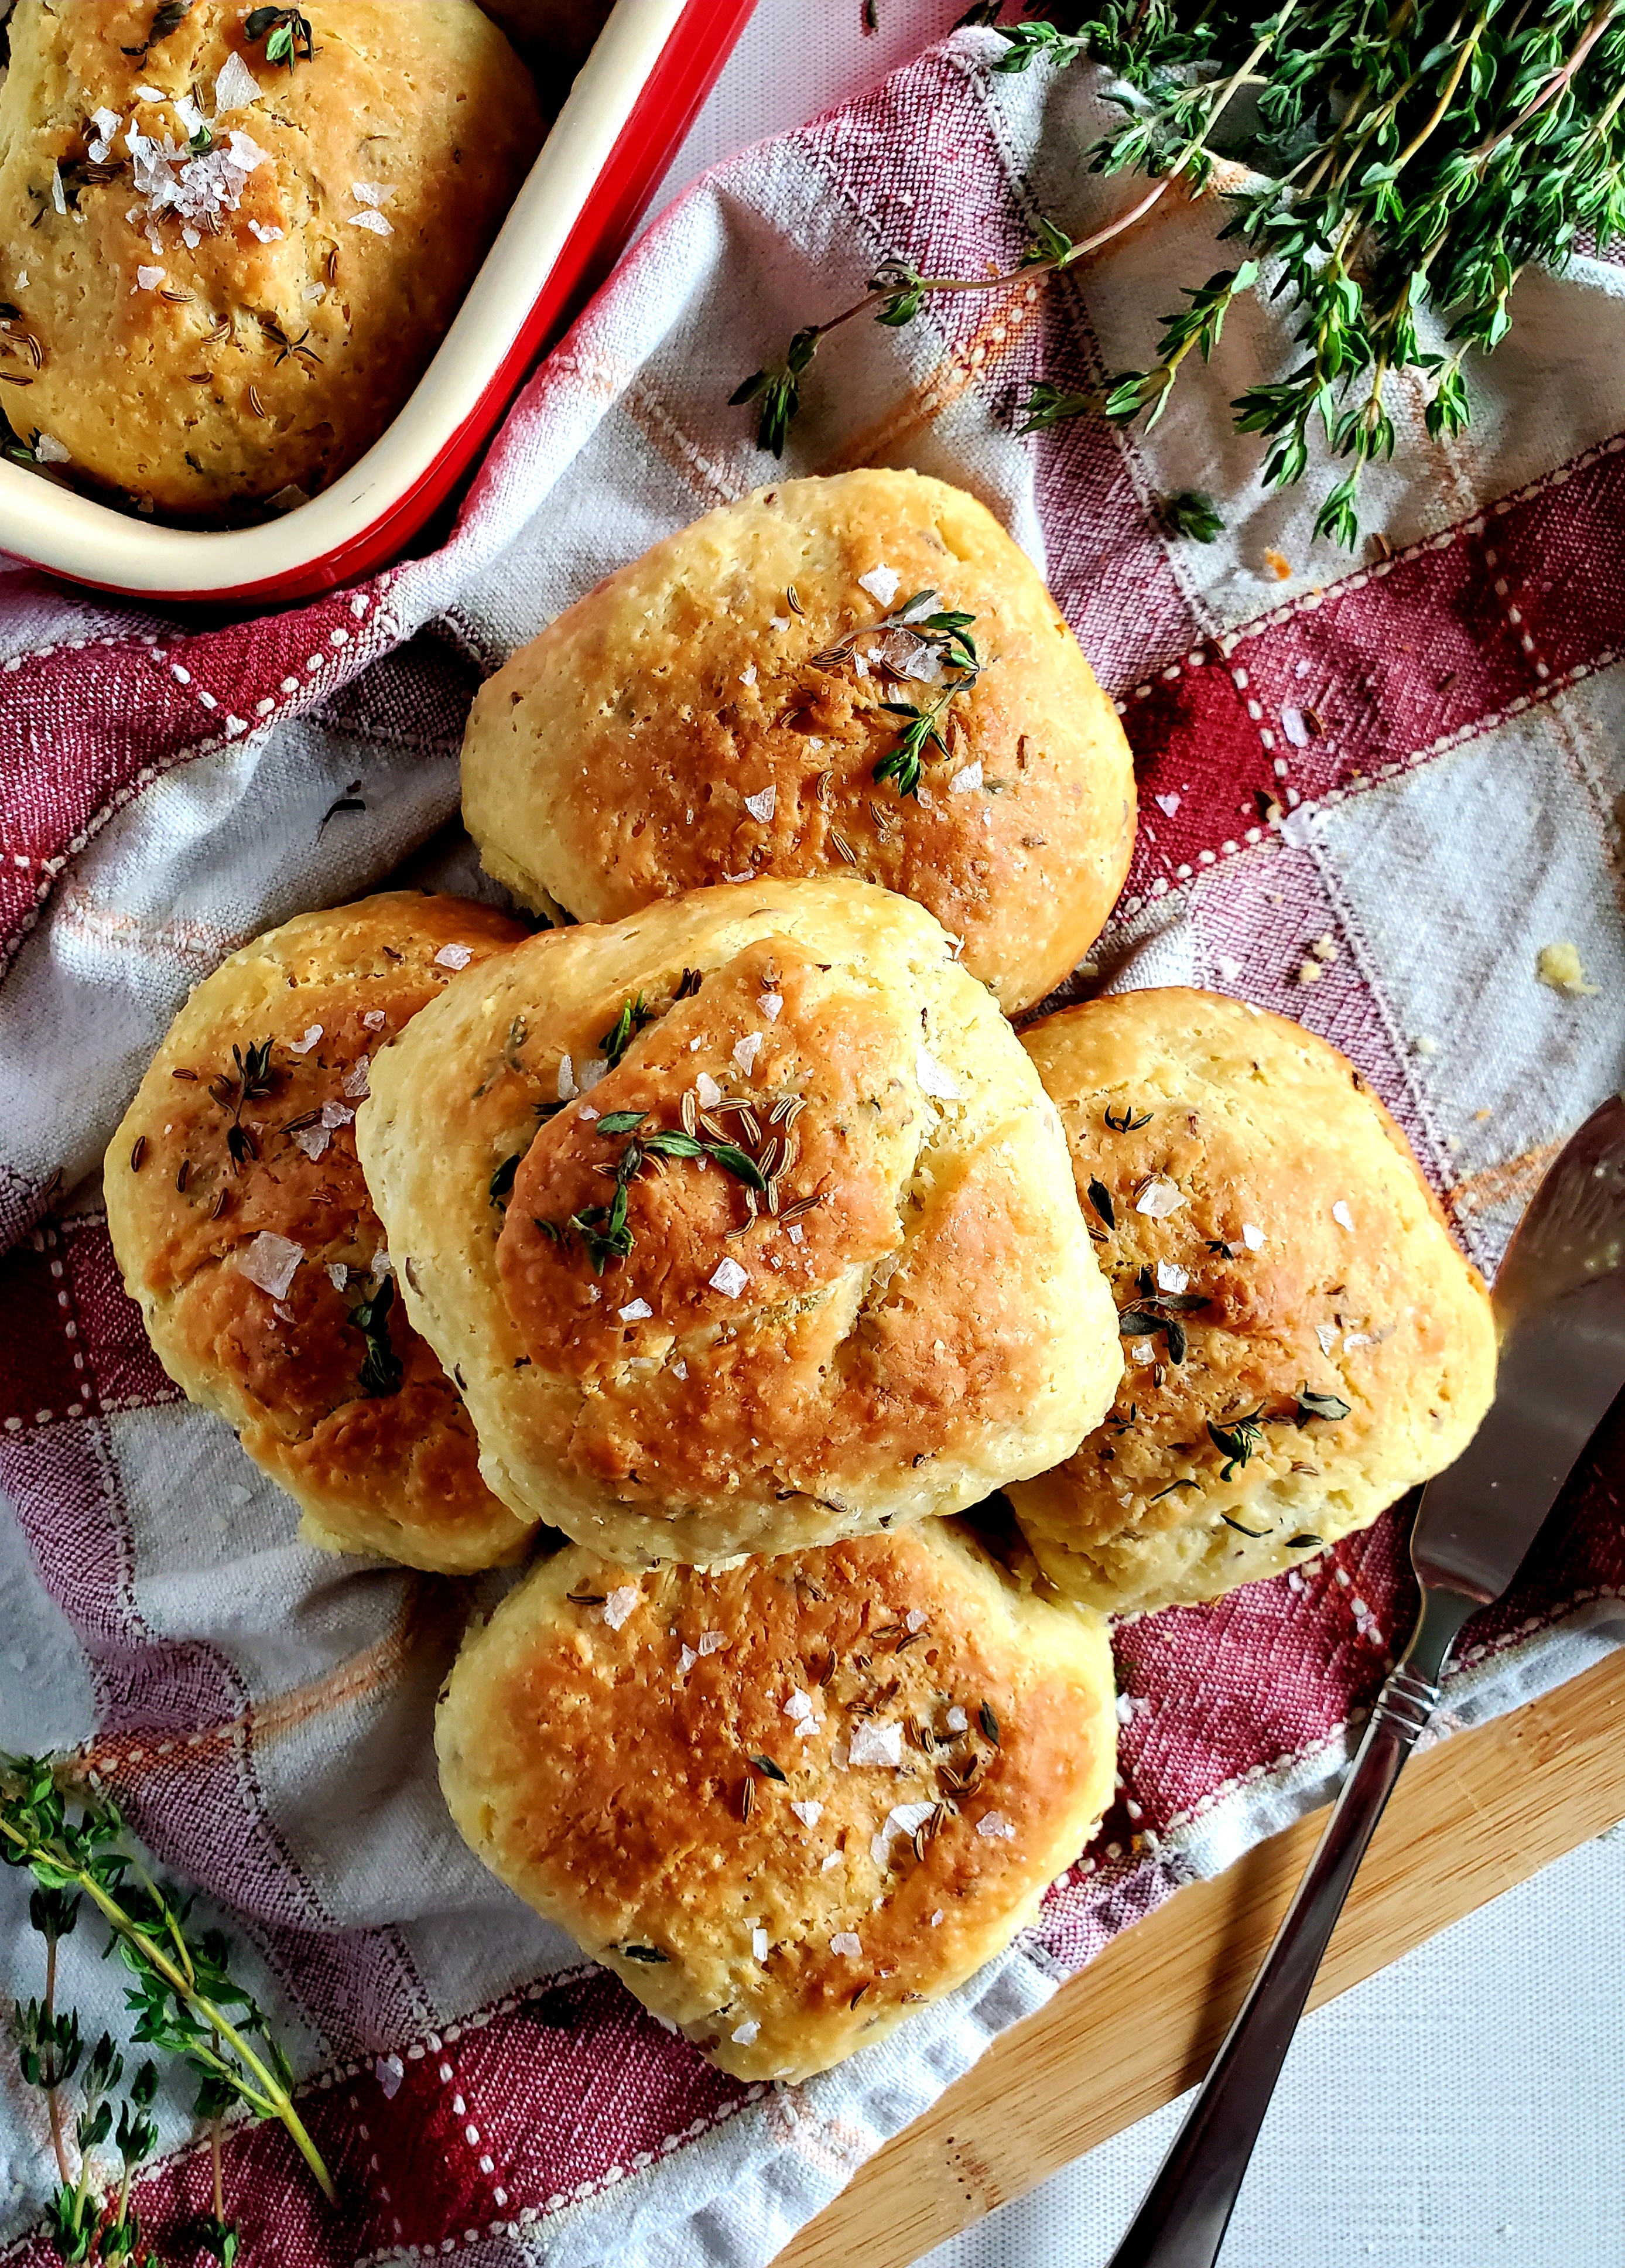 Savory Thyme and Caraway Biscuits